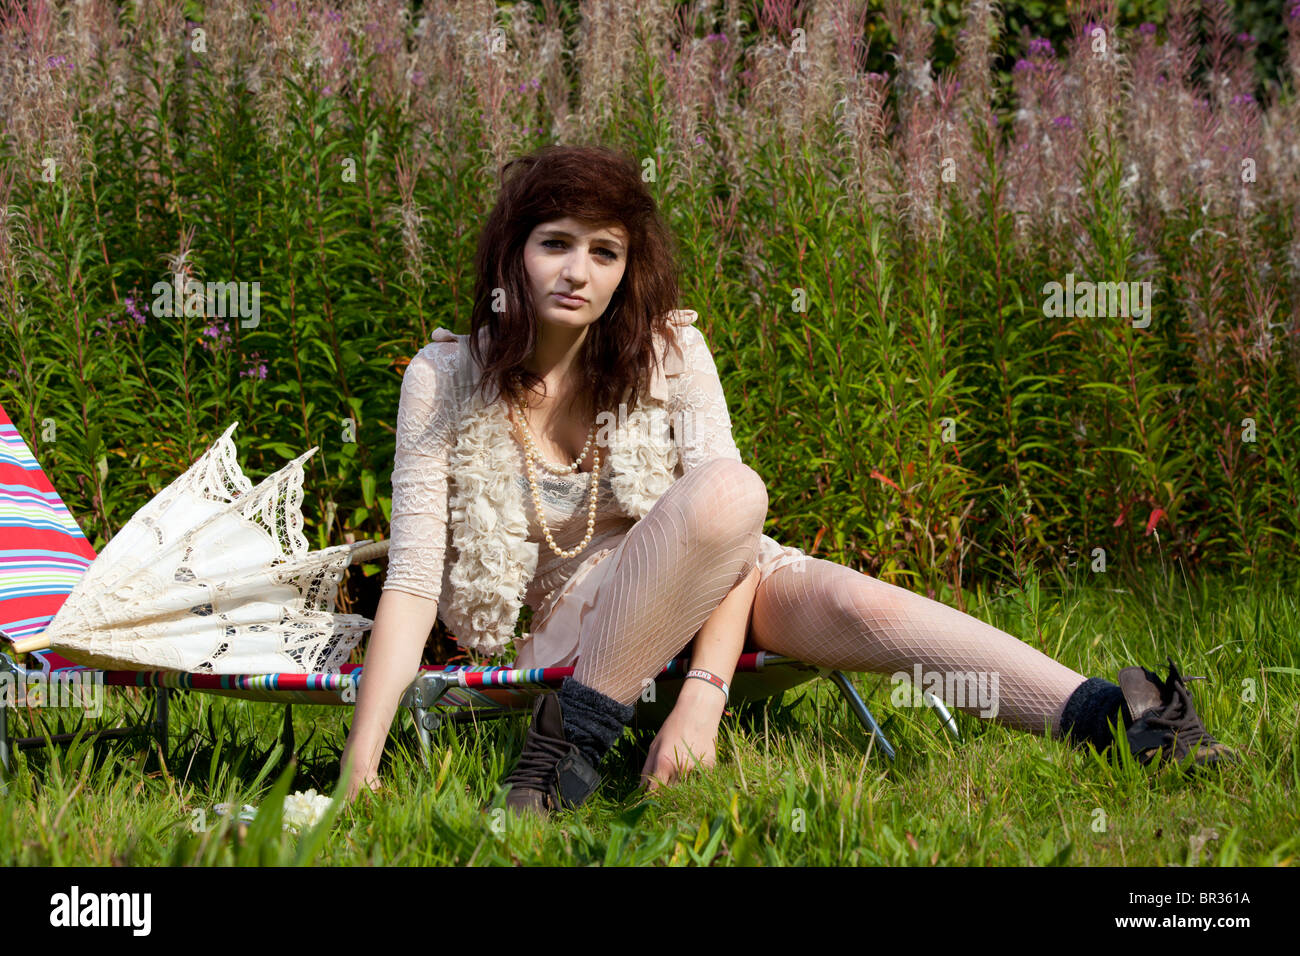 A model with long dark hair and wearing light coloured clothing poses in an overgrown garden with a parasol. Stock Photo